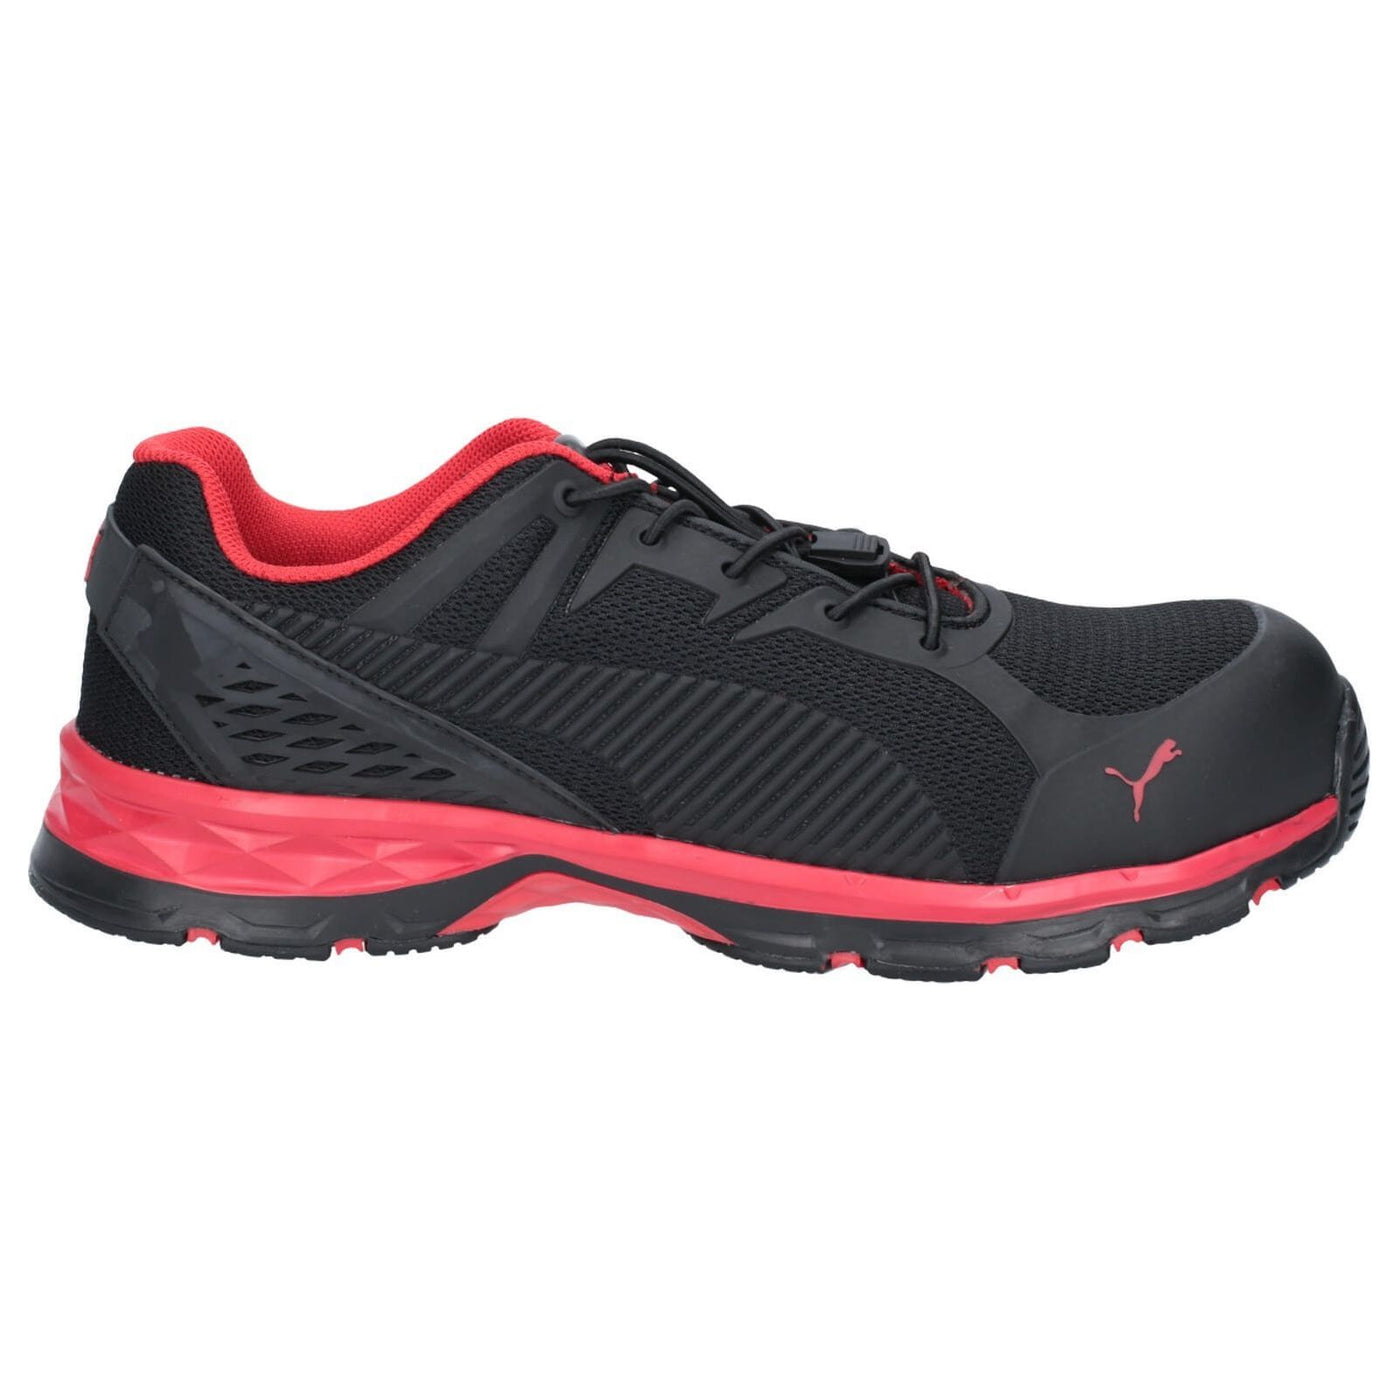 Puma Fuse Motion 2.0 Safety Shoes-Red-Black-4